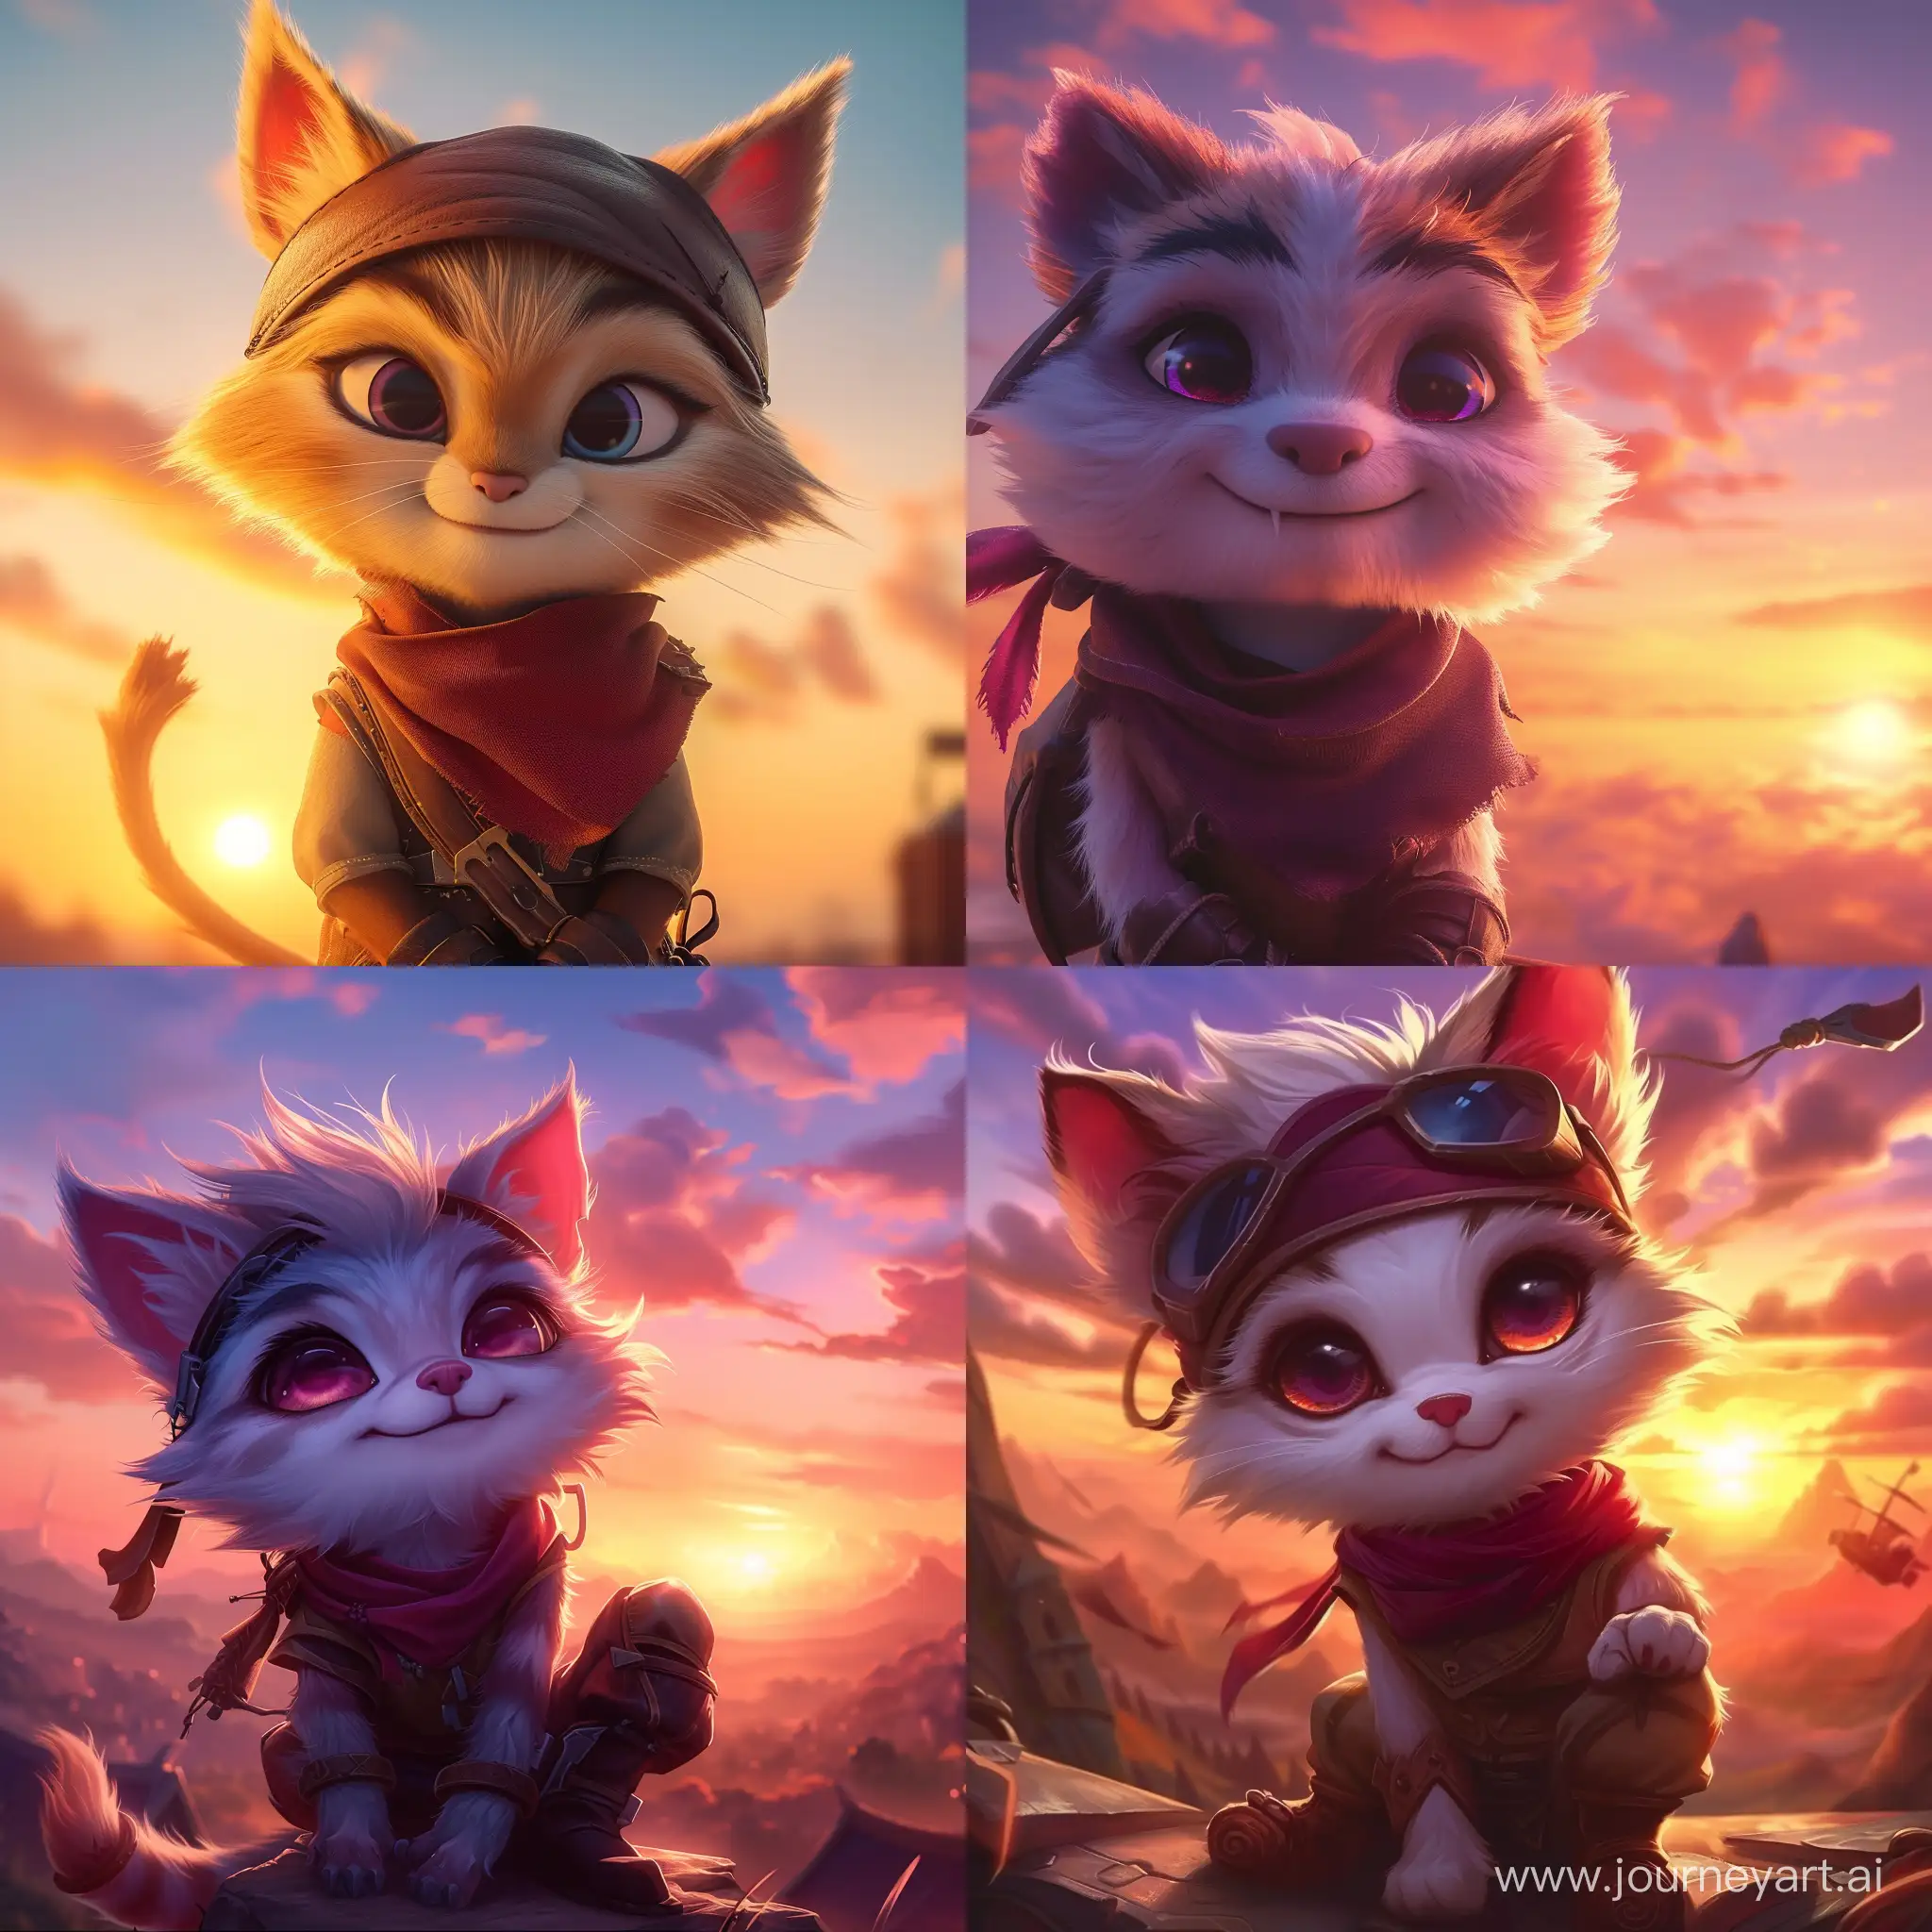 teemo with cute face from Puss in Boots movie , sweety, league of legends, background of sunset